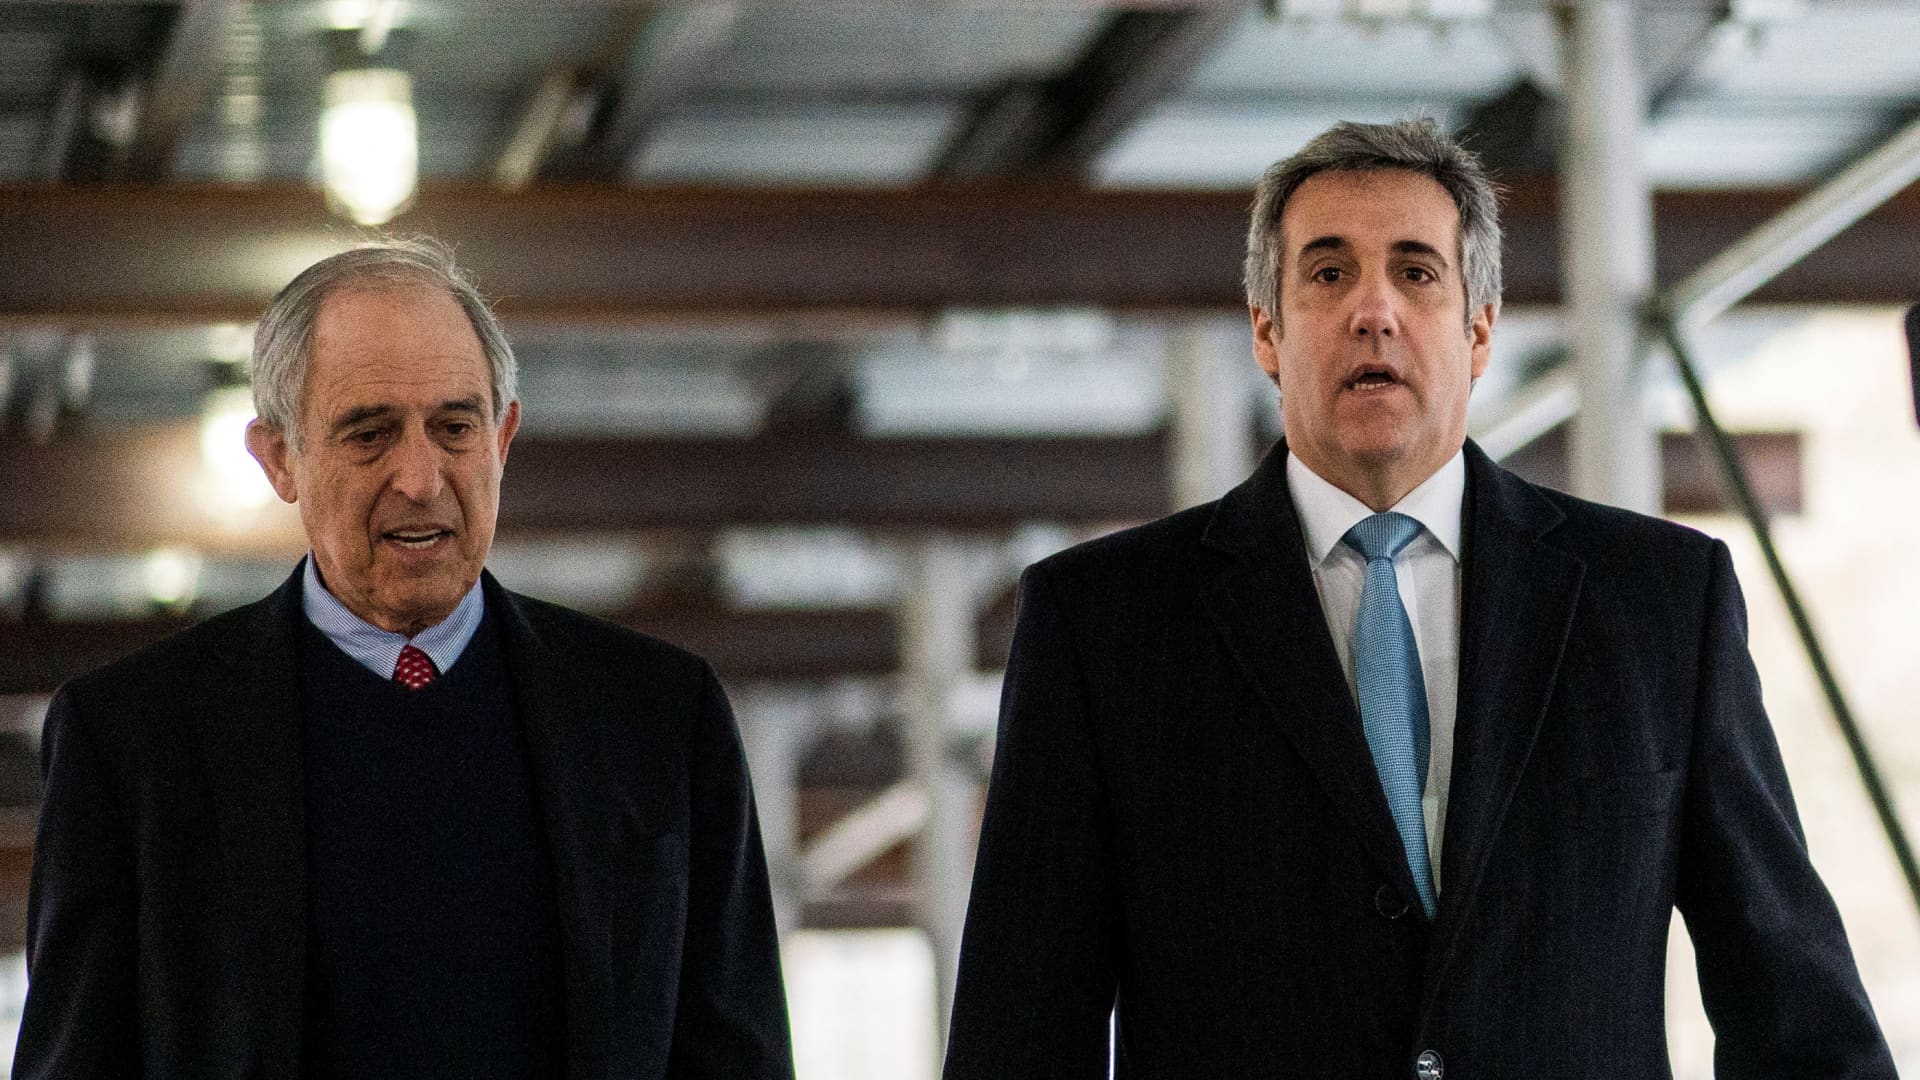 Michael Cohen, former attorney for former U.S. President Donald Trump, with his lawyer Lanny Davis, arrives to the New York Courthouse in New York City, U.S., March 13, 2023.